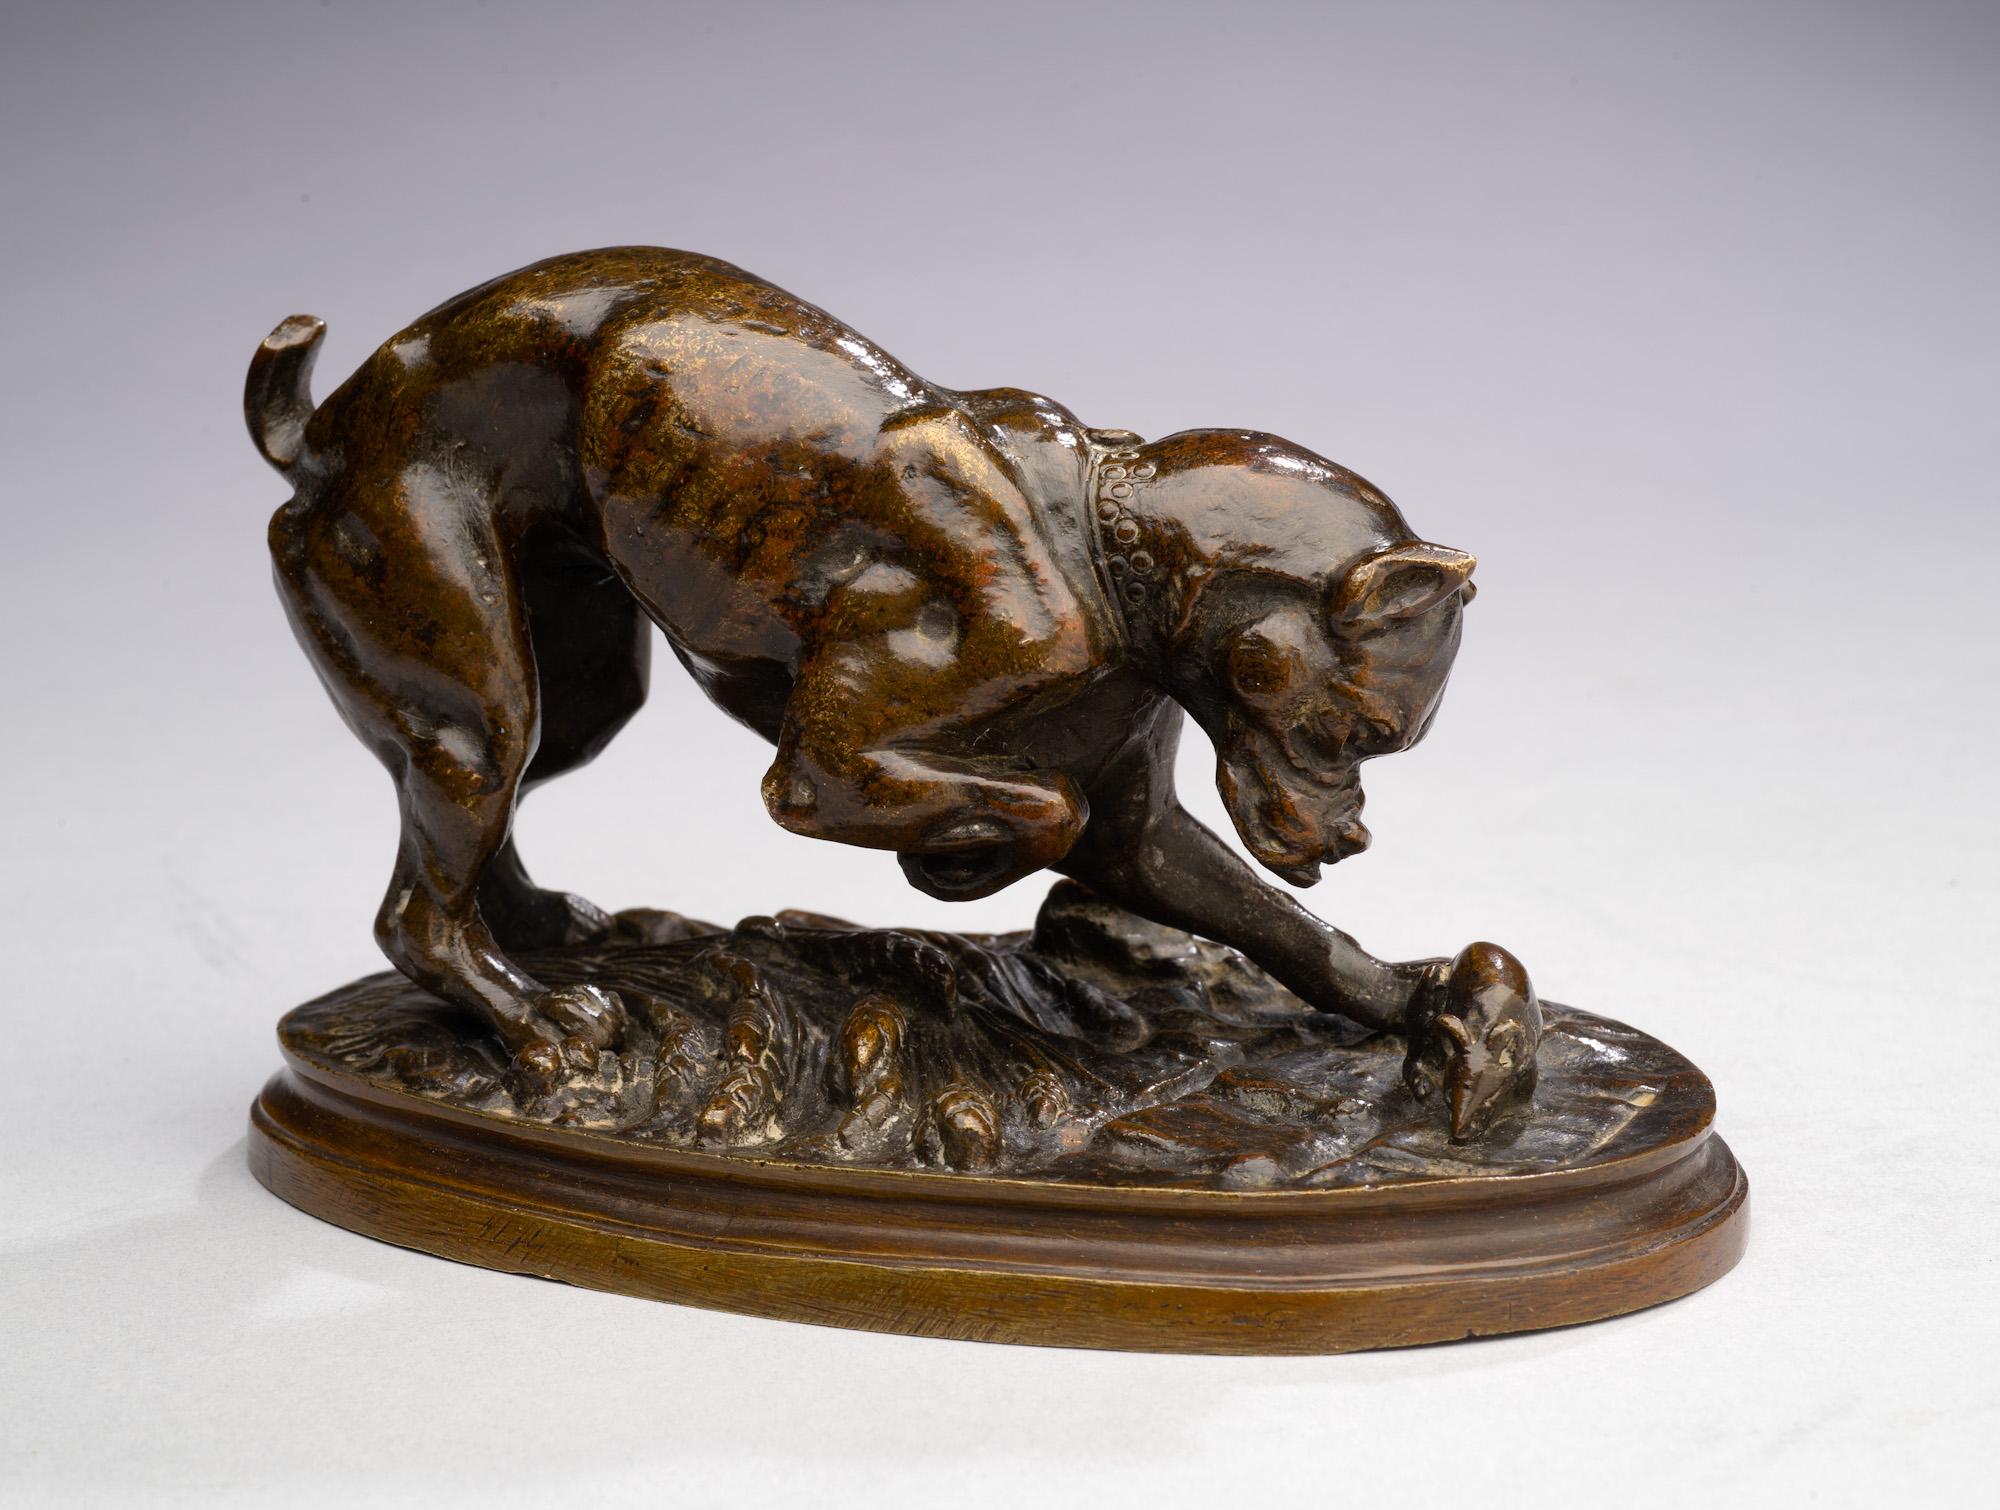 Antique Bronze Dog
Bulldog Playing with a Mouse on Sheaves of Wheat
Henri Émile Adrien Trodoux (1815-1881)
6 1/8 x 3 7/5 inches
Signed on the terrace

Henri Émile Adrien Trodoux (French, 1815-1881) was an accomplished sculptor from the Animalier